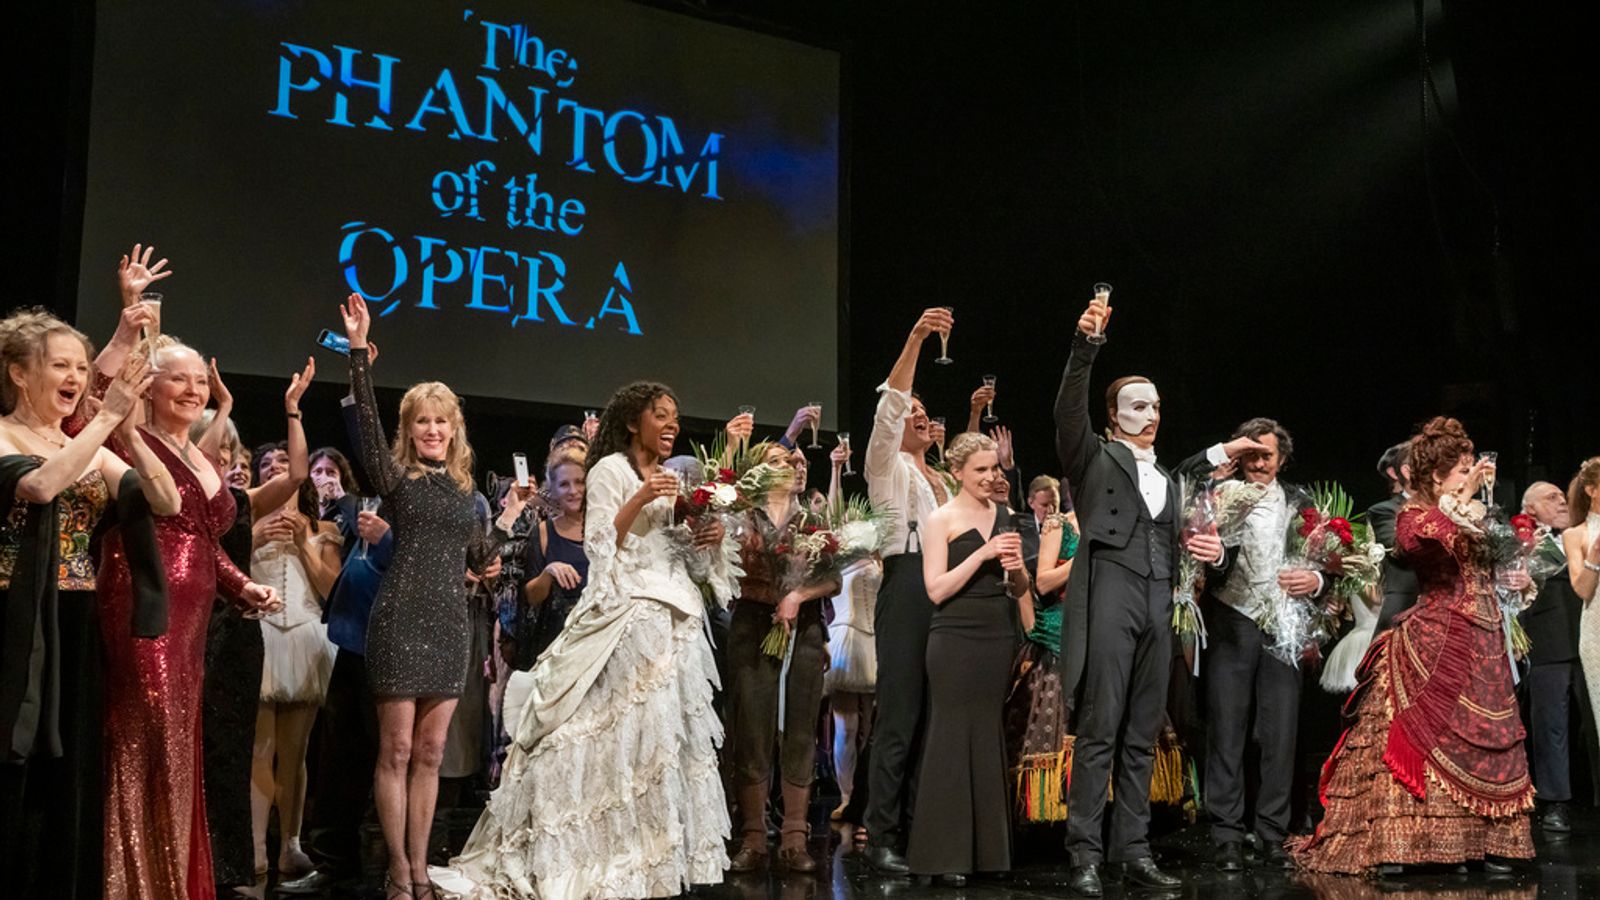 Phantom of the Opera takes its final curtain call on Broadway - ending a record-breaking 35-year-long run in New York